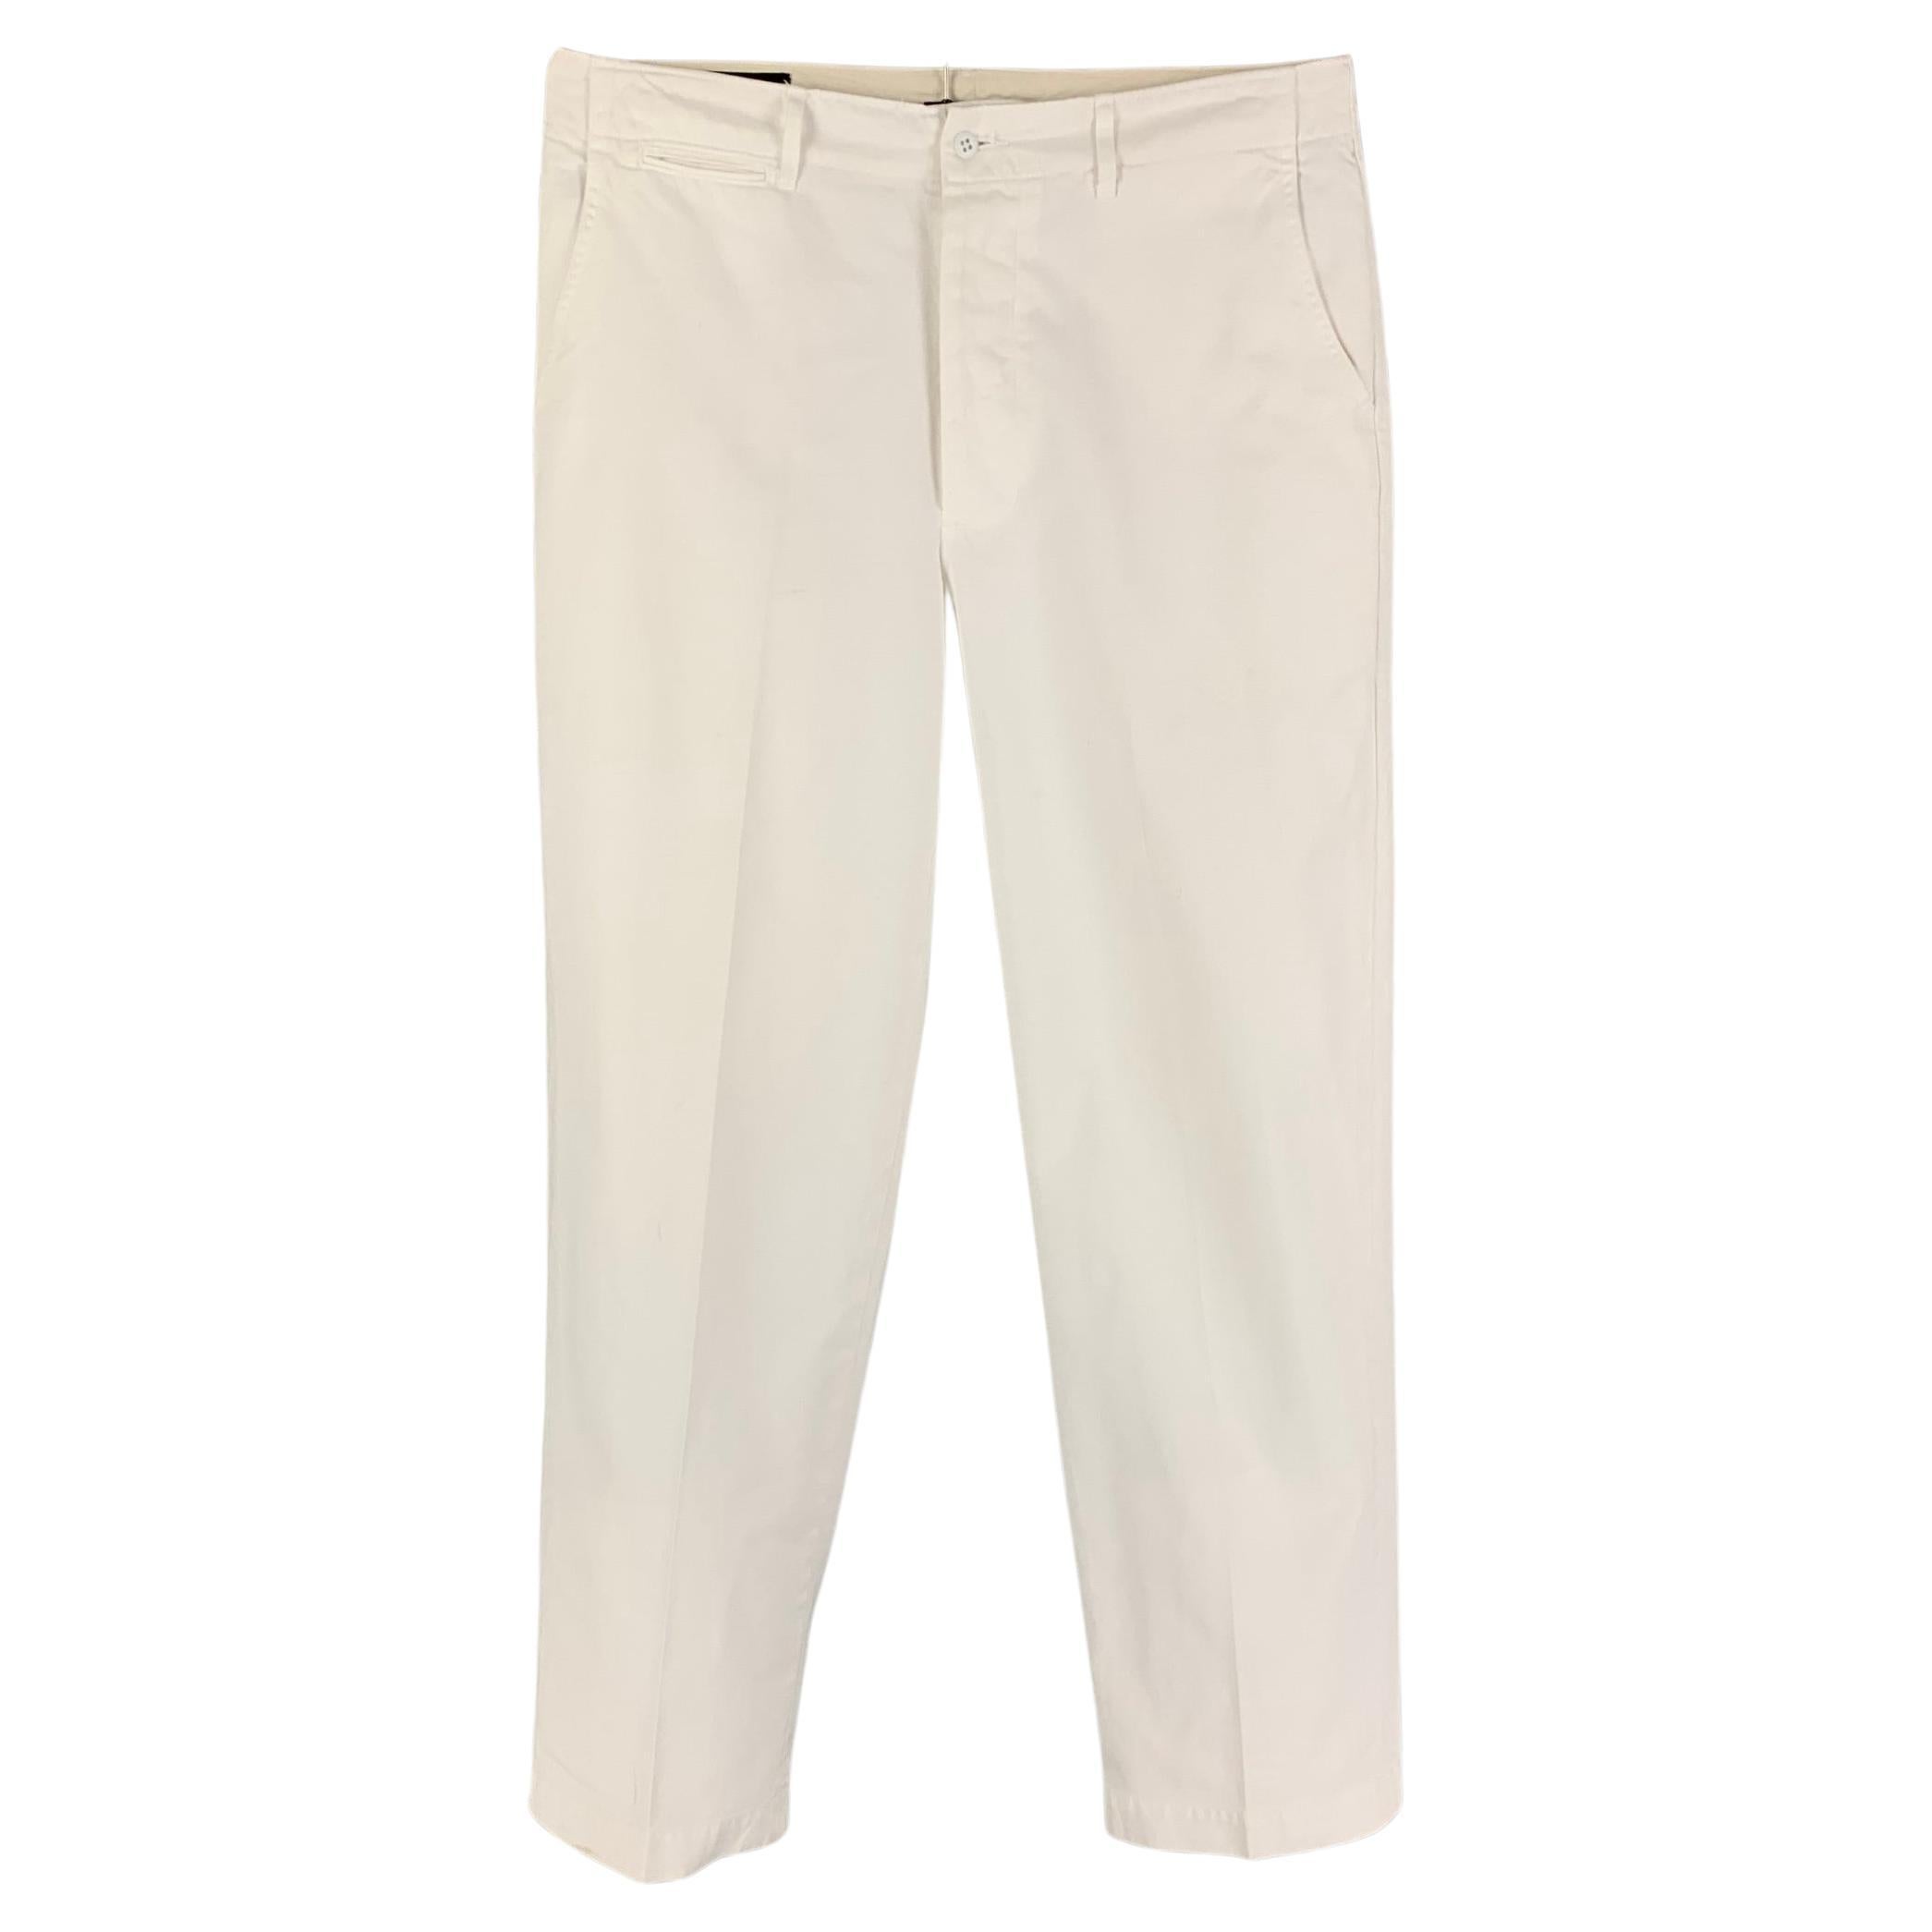 Christian Dior by John Galliano brown and cream calfskin leather pants ...